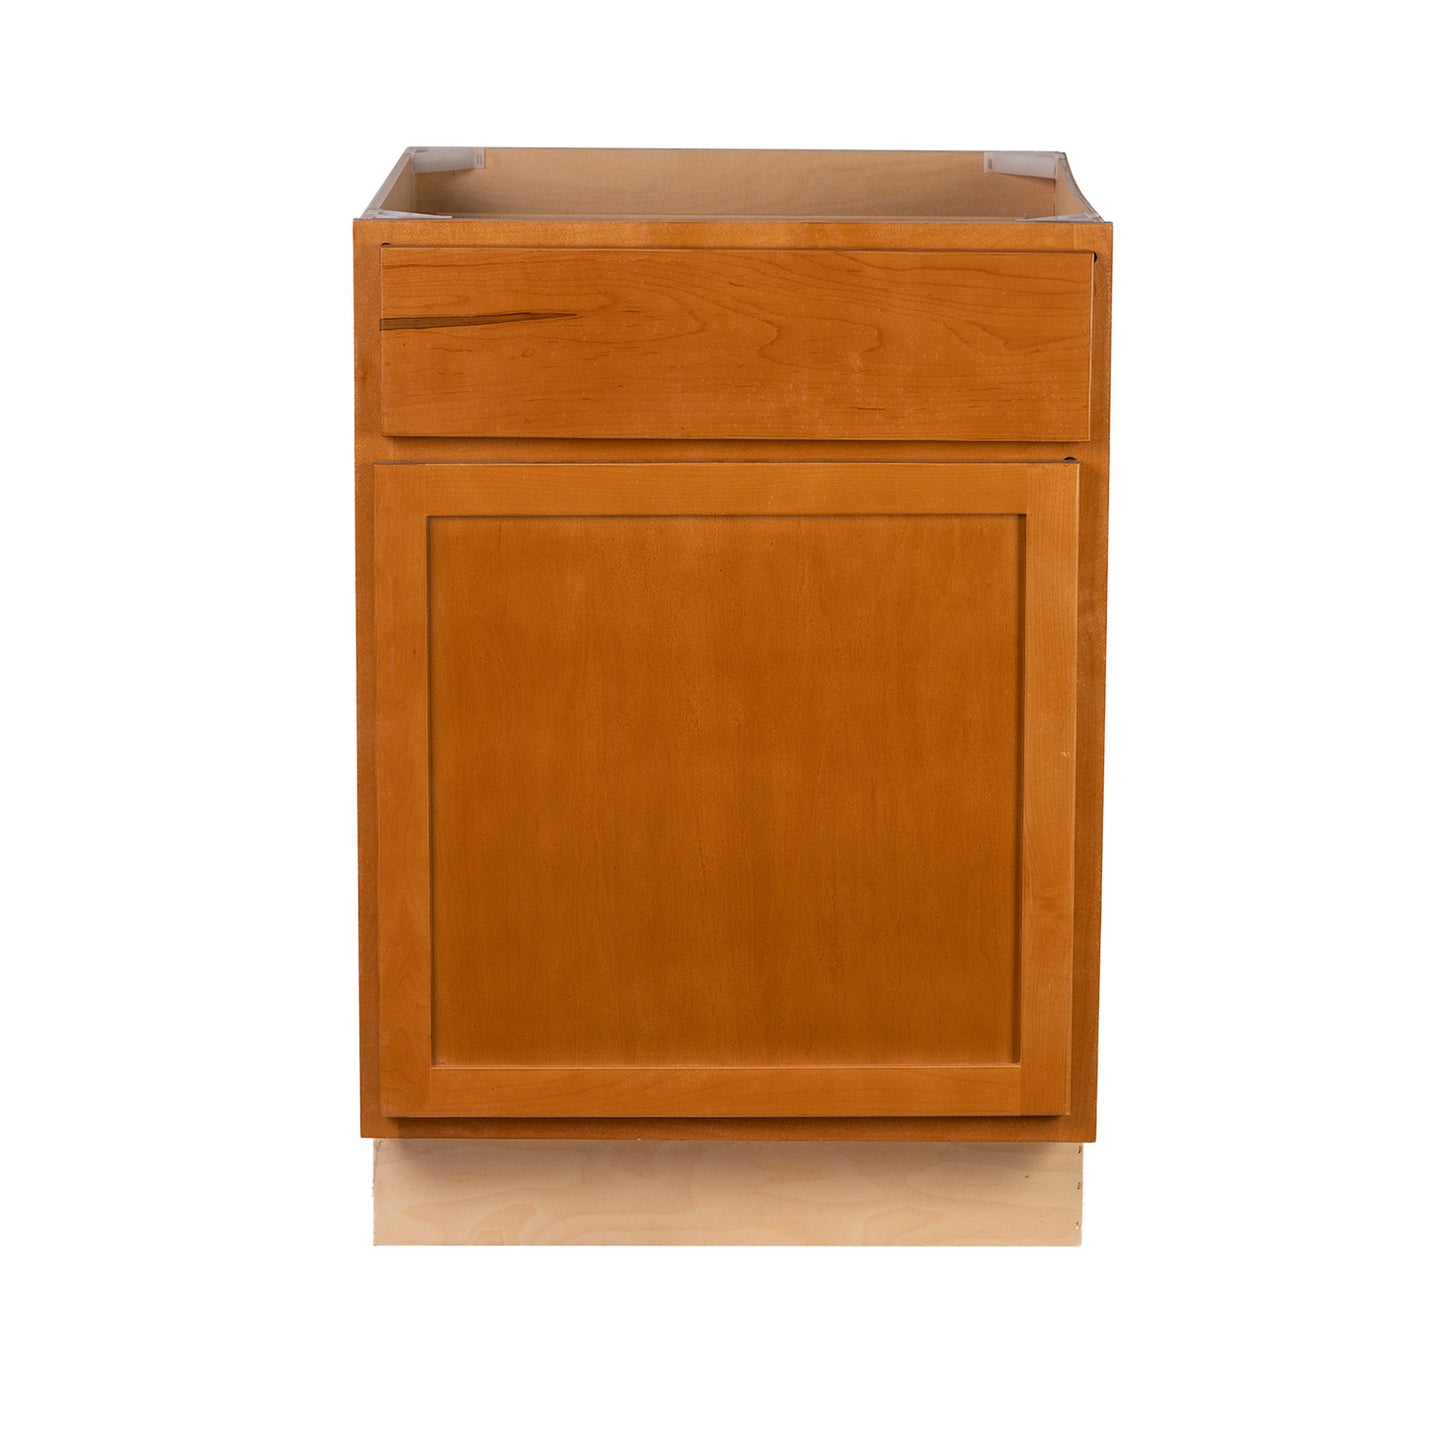 Quicklock RTA (Ready-to-Assemble) Provincial Stain Base Cabinet | 24"Wx34.5"Hx24"D